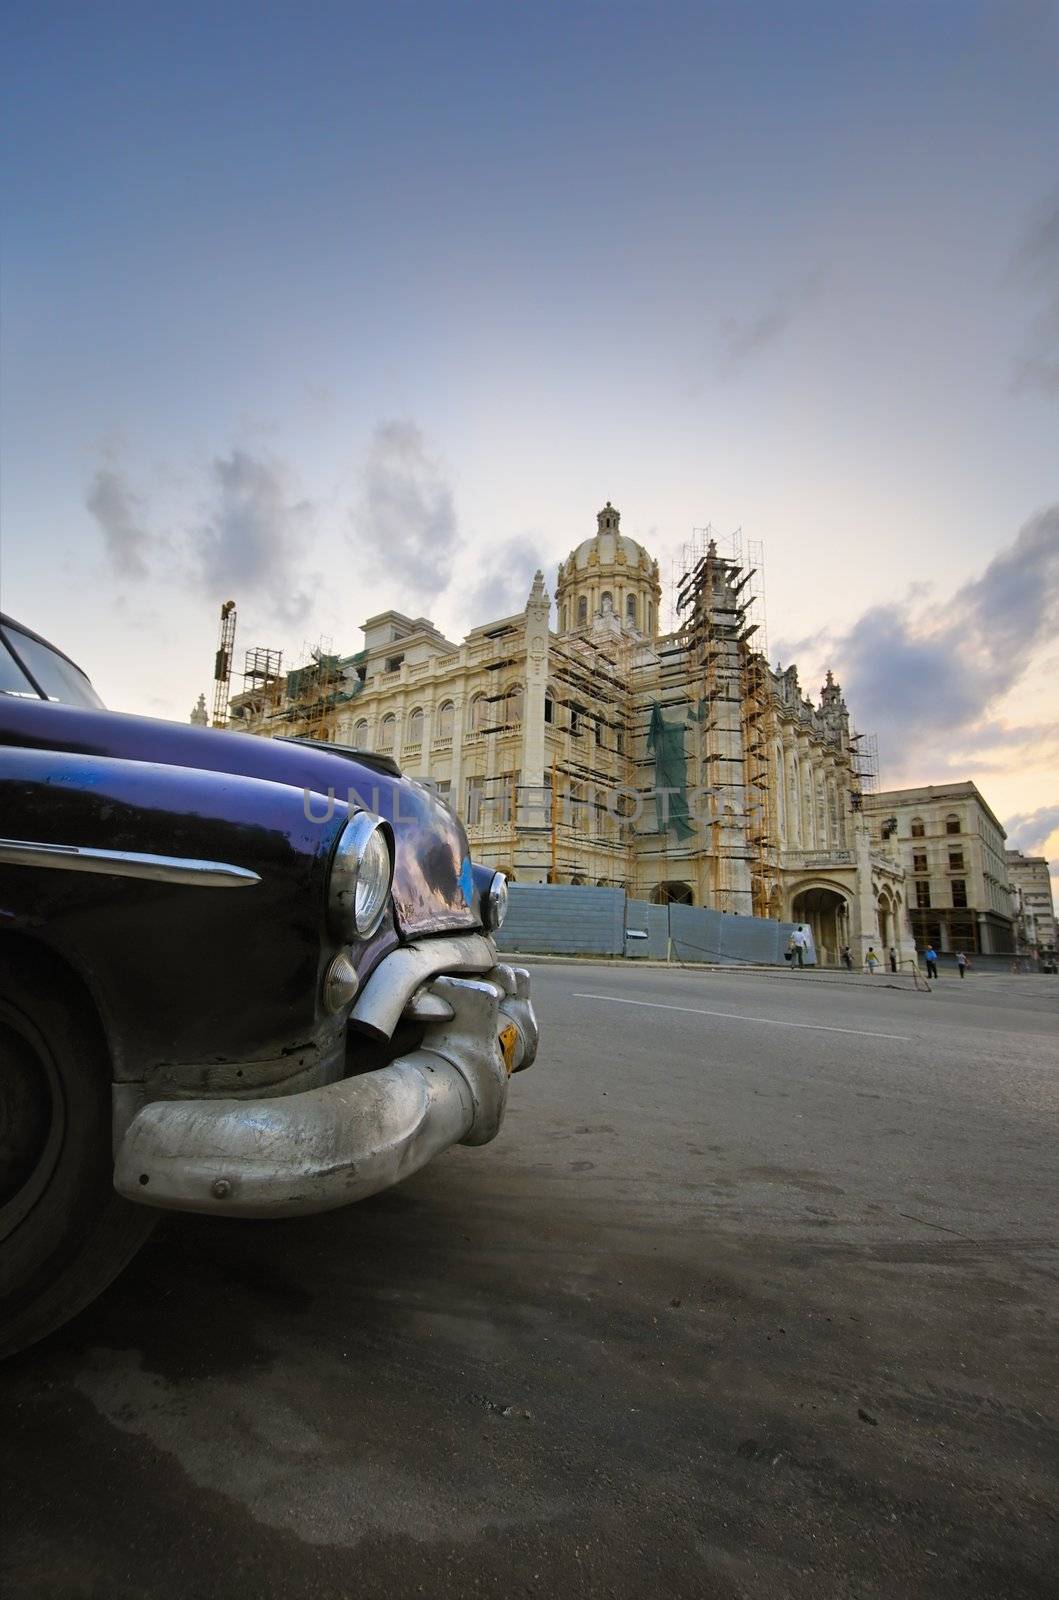 Car and Revolution palace in havana, cuba by rgbspace